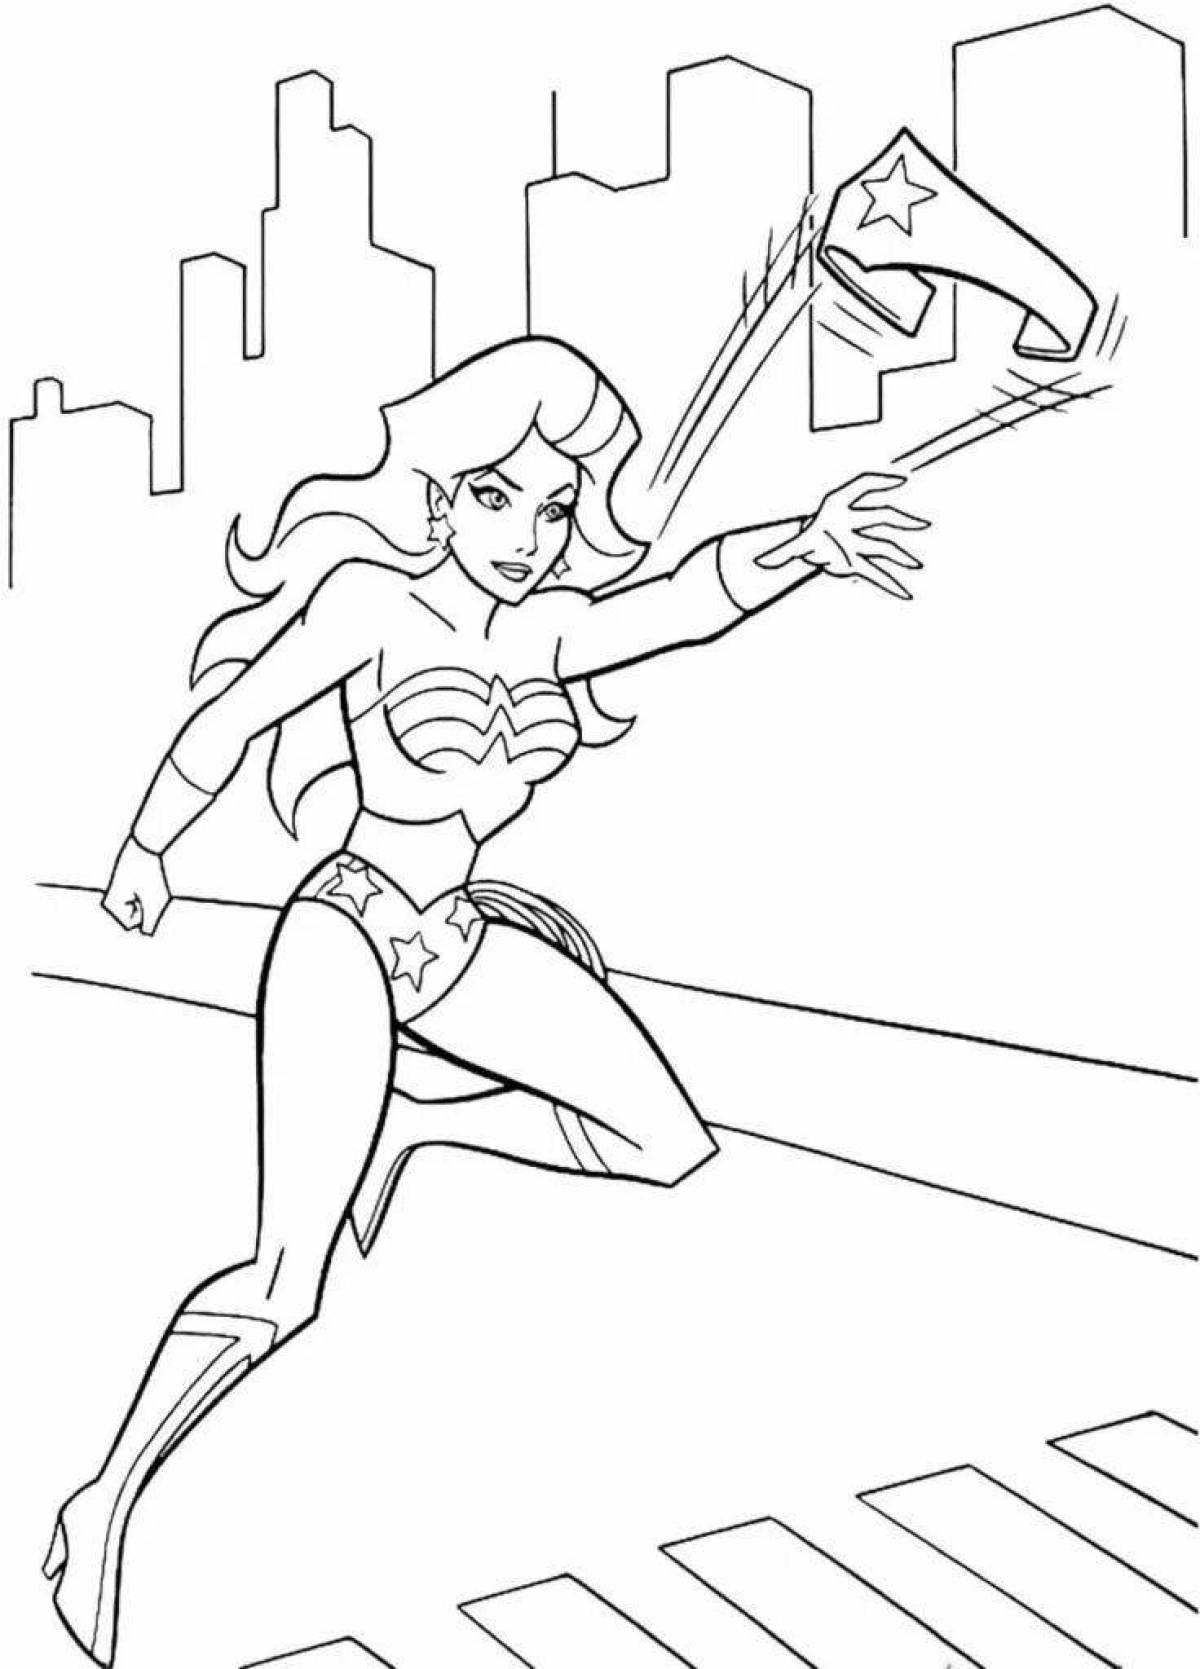 Majestic marvel coloring page